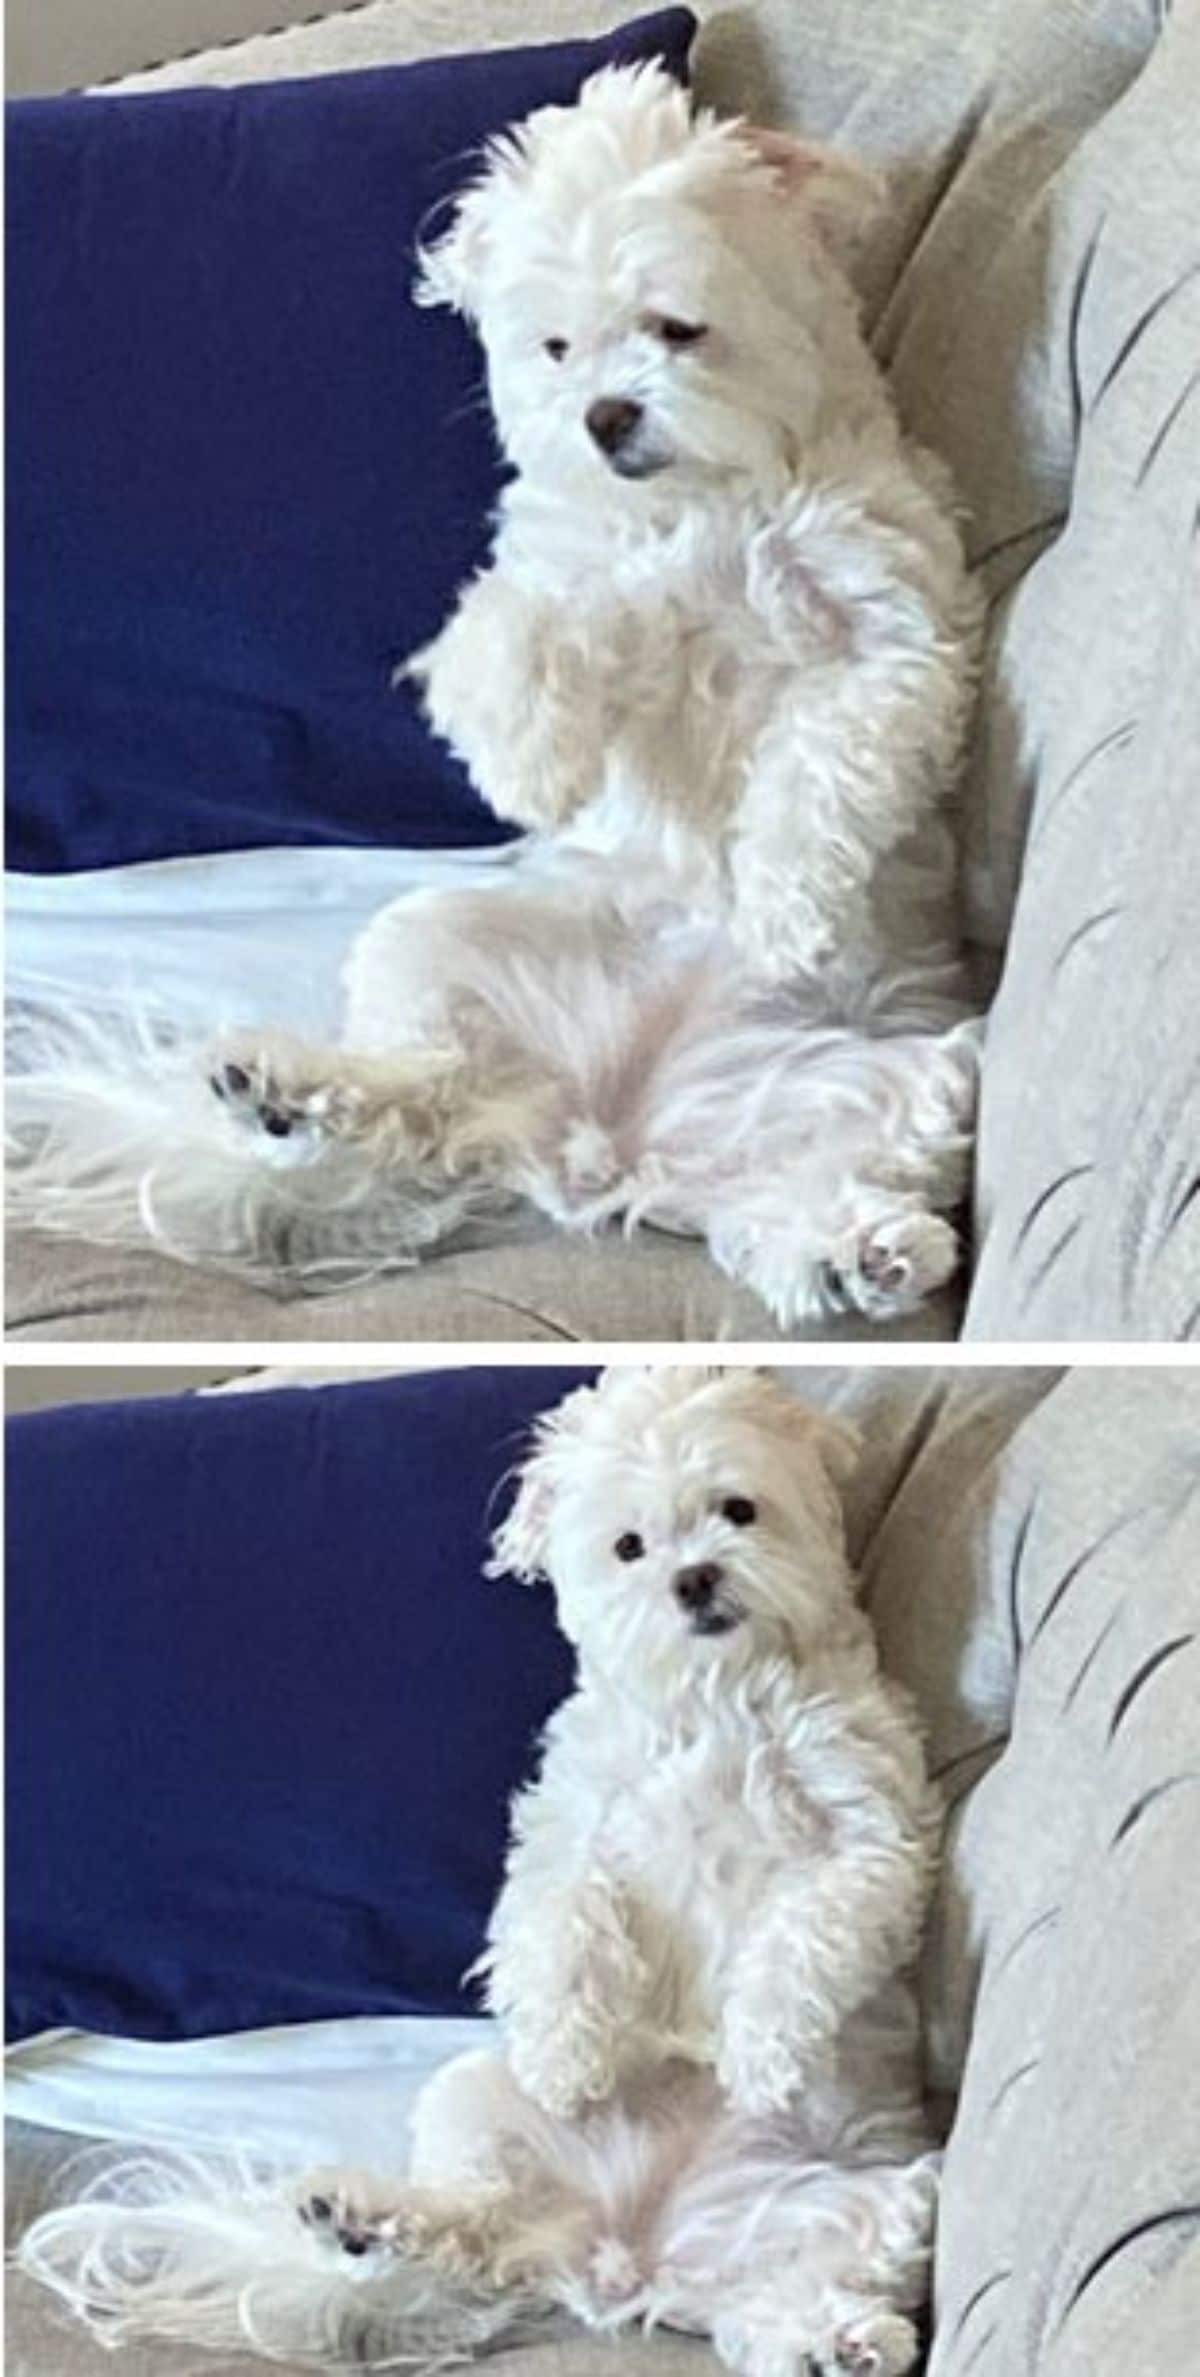 2 photos of a small fluffy white dog on a grye sofa sitting up on its haunches